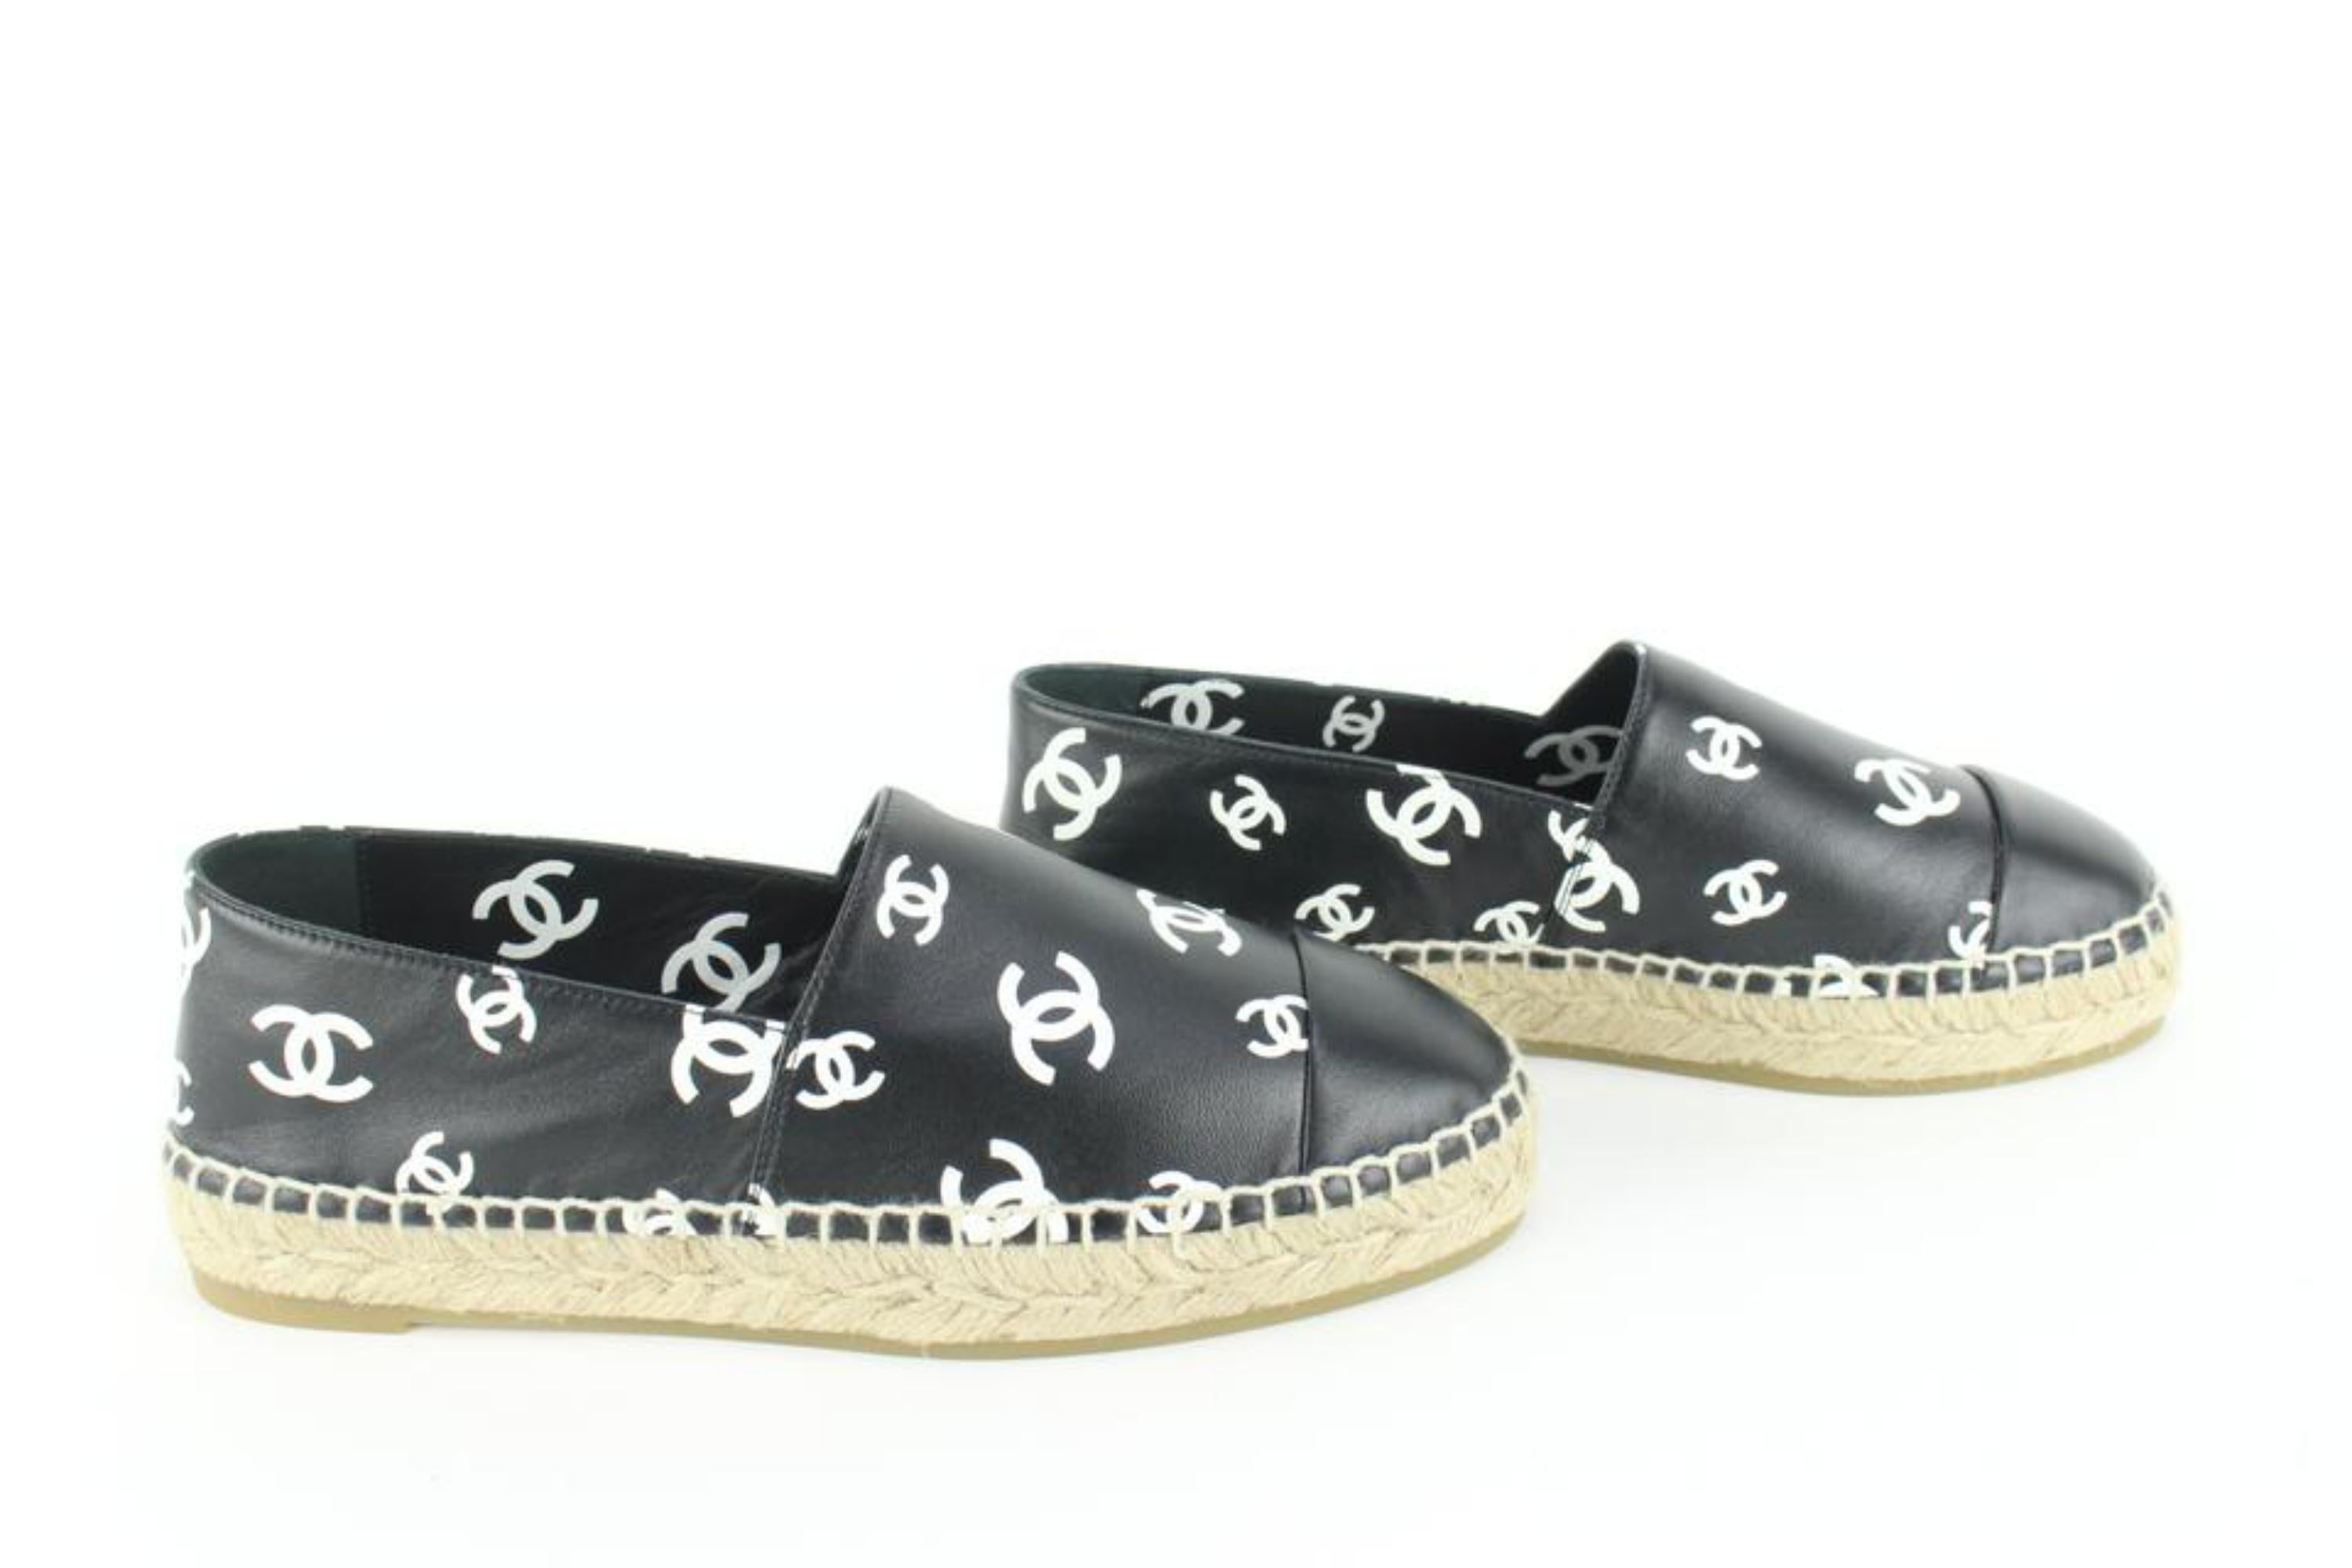 Chanel Shoes Espadrilles, Black with Silver CC, Size 38, New in Box WA001